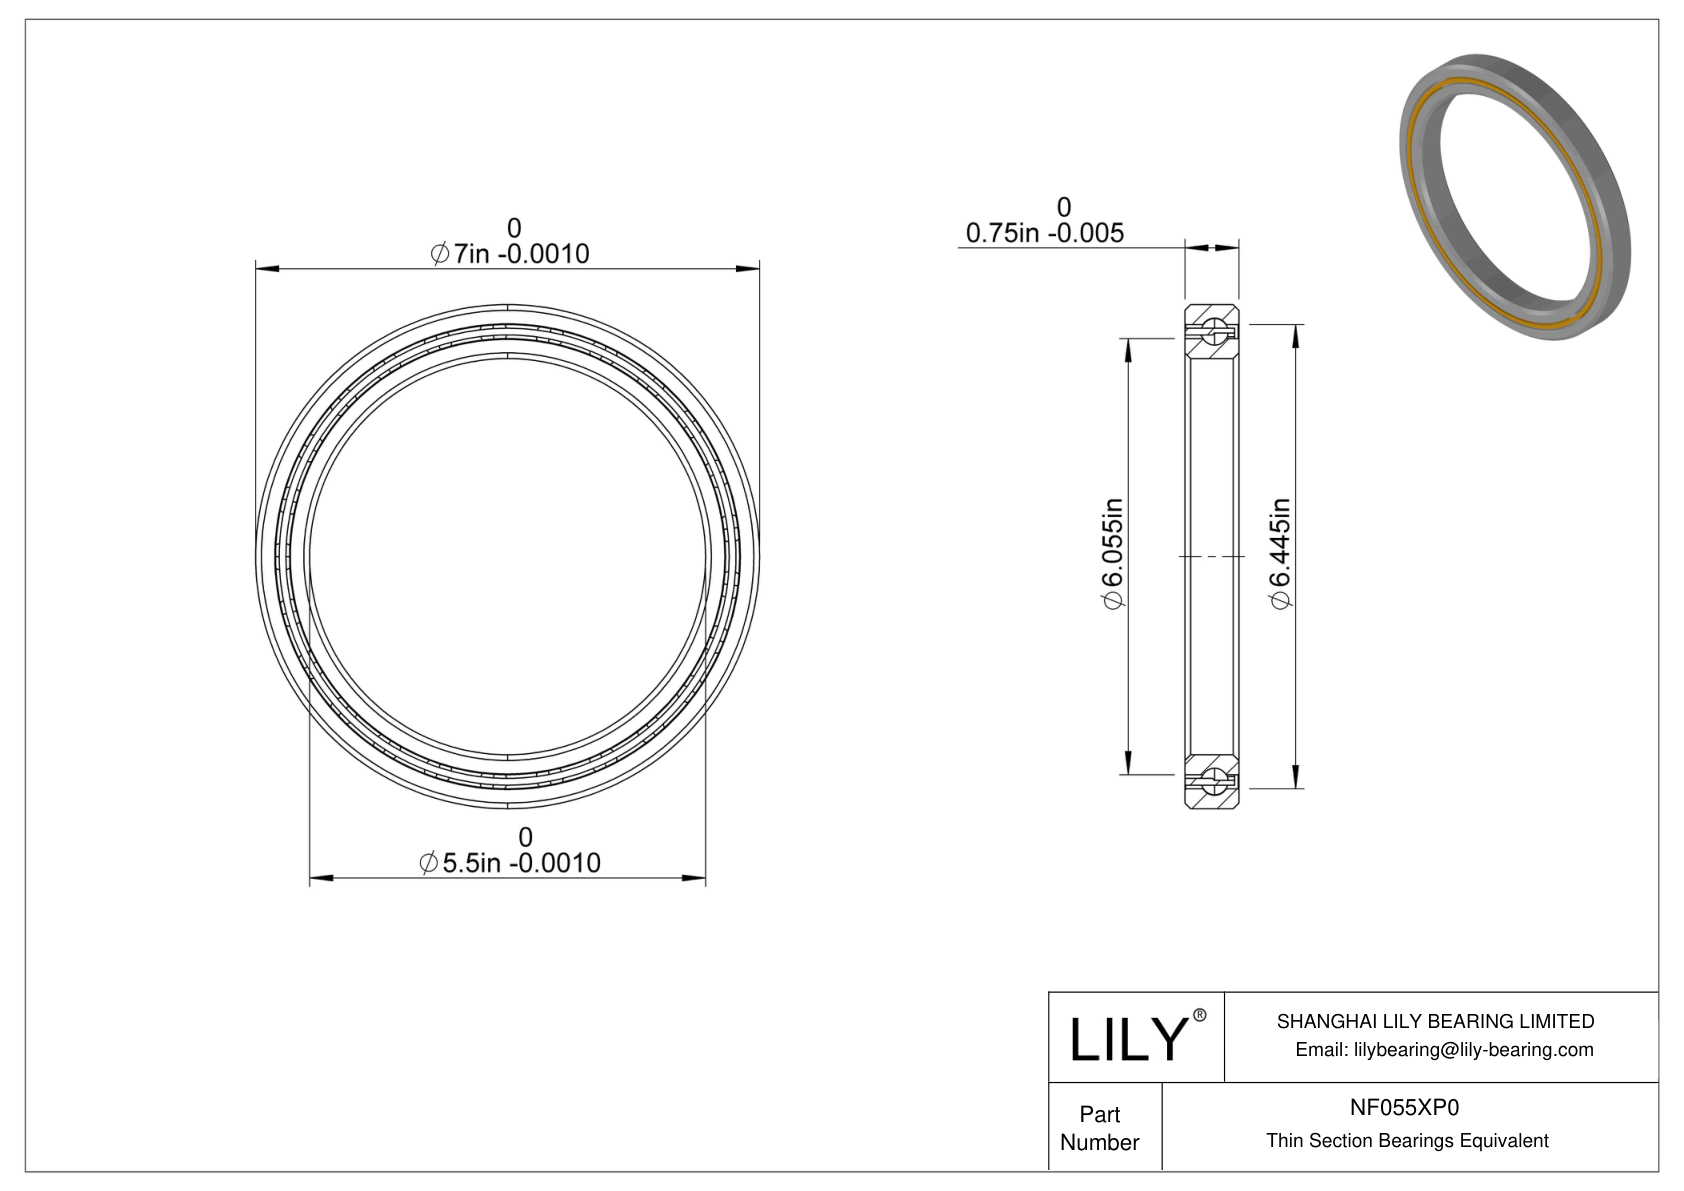 NF055XP0 Constant Section (CS) Bearings cad drawing